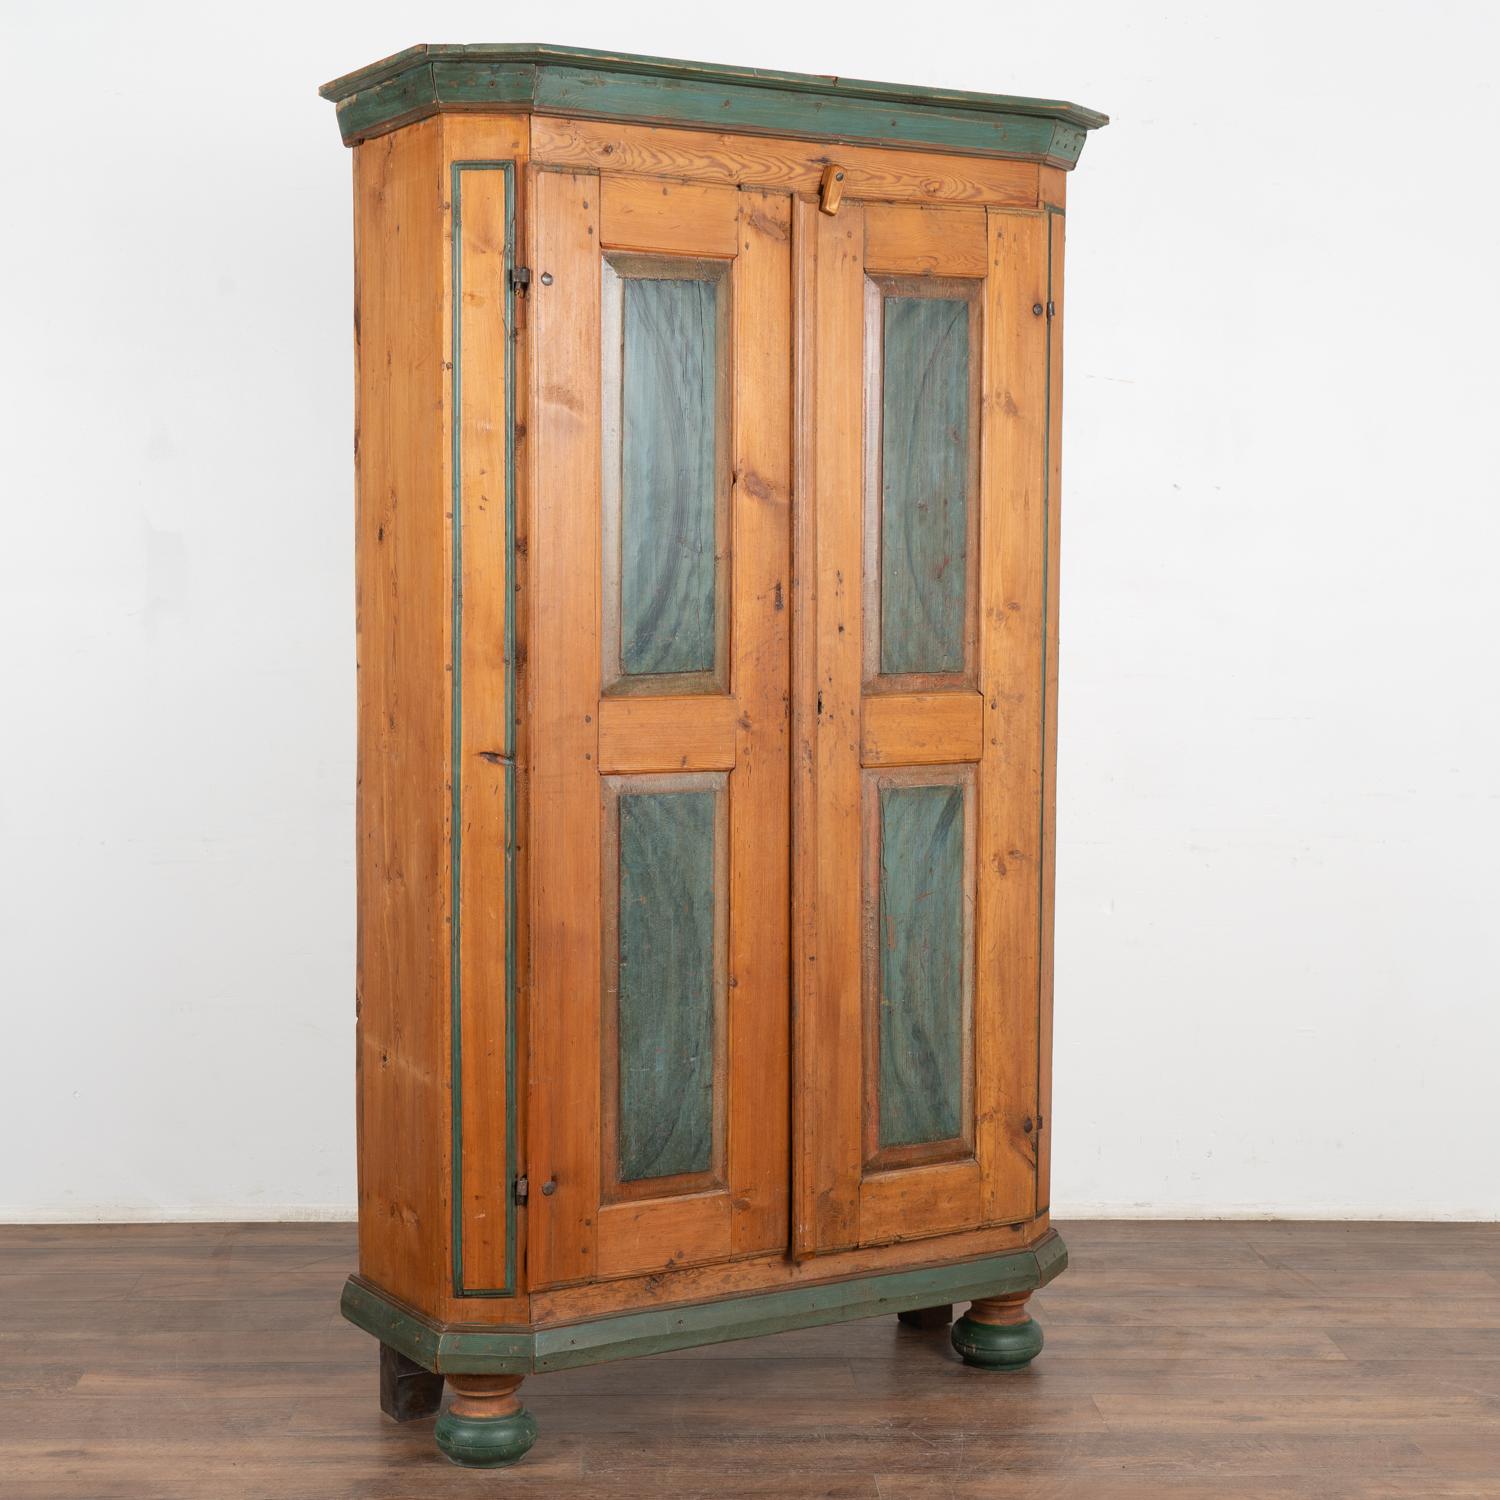 This narrow armoire from the Swedish countryside shows off its age in the warm, deep patina of the natural pine and stands 6.5' tall. 
The original hand-painted teal blue panels were painted in the folk art style of the era, along with decorative